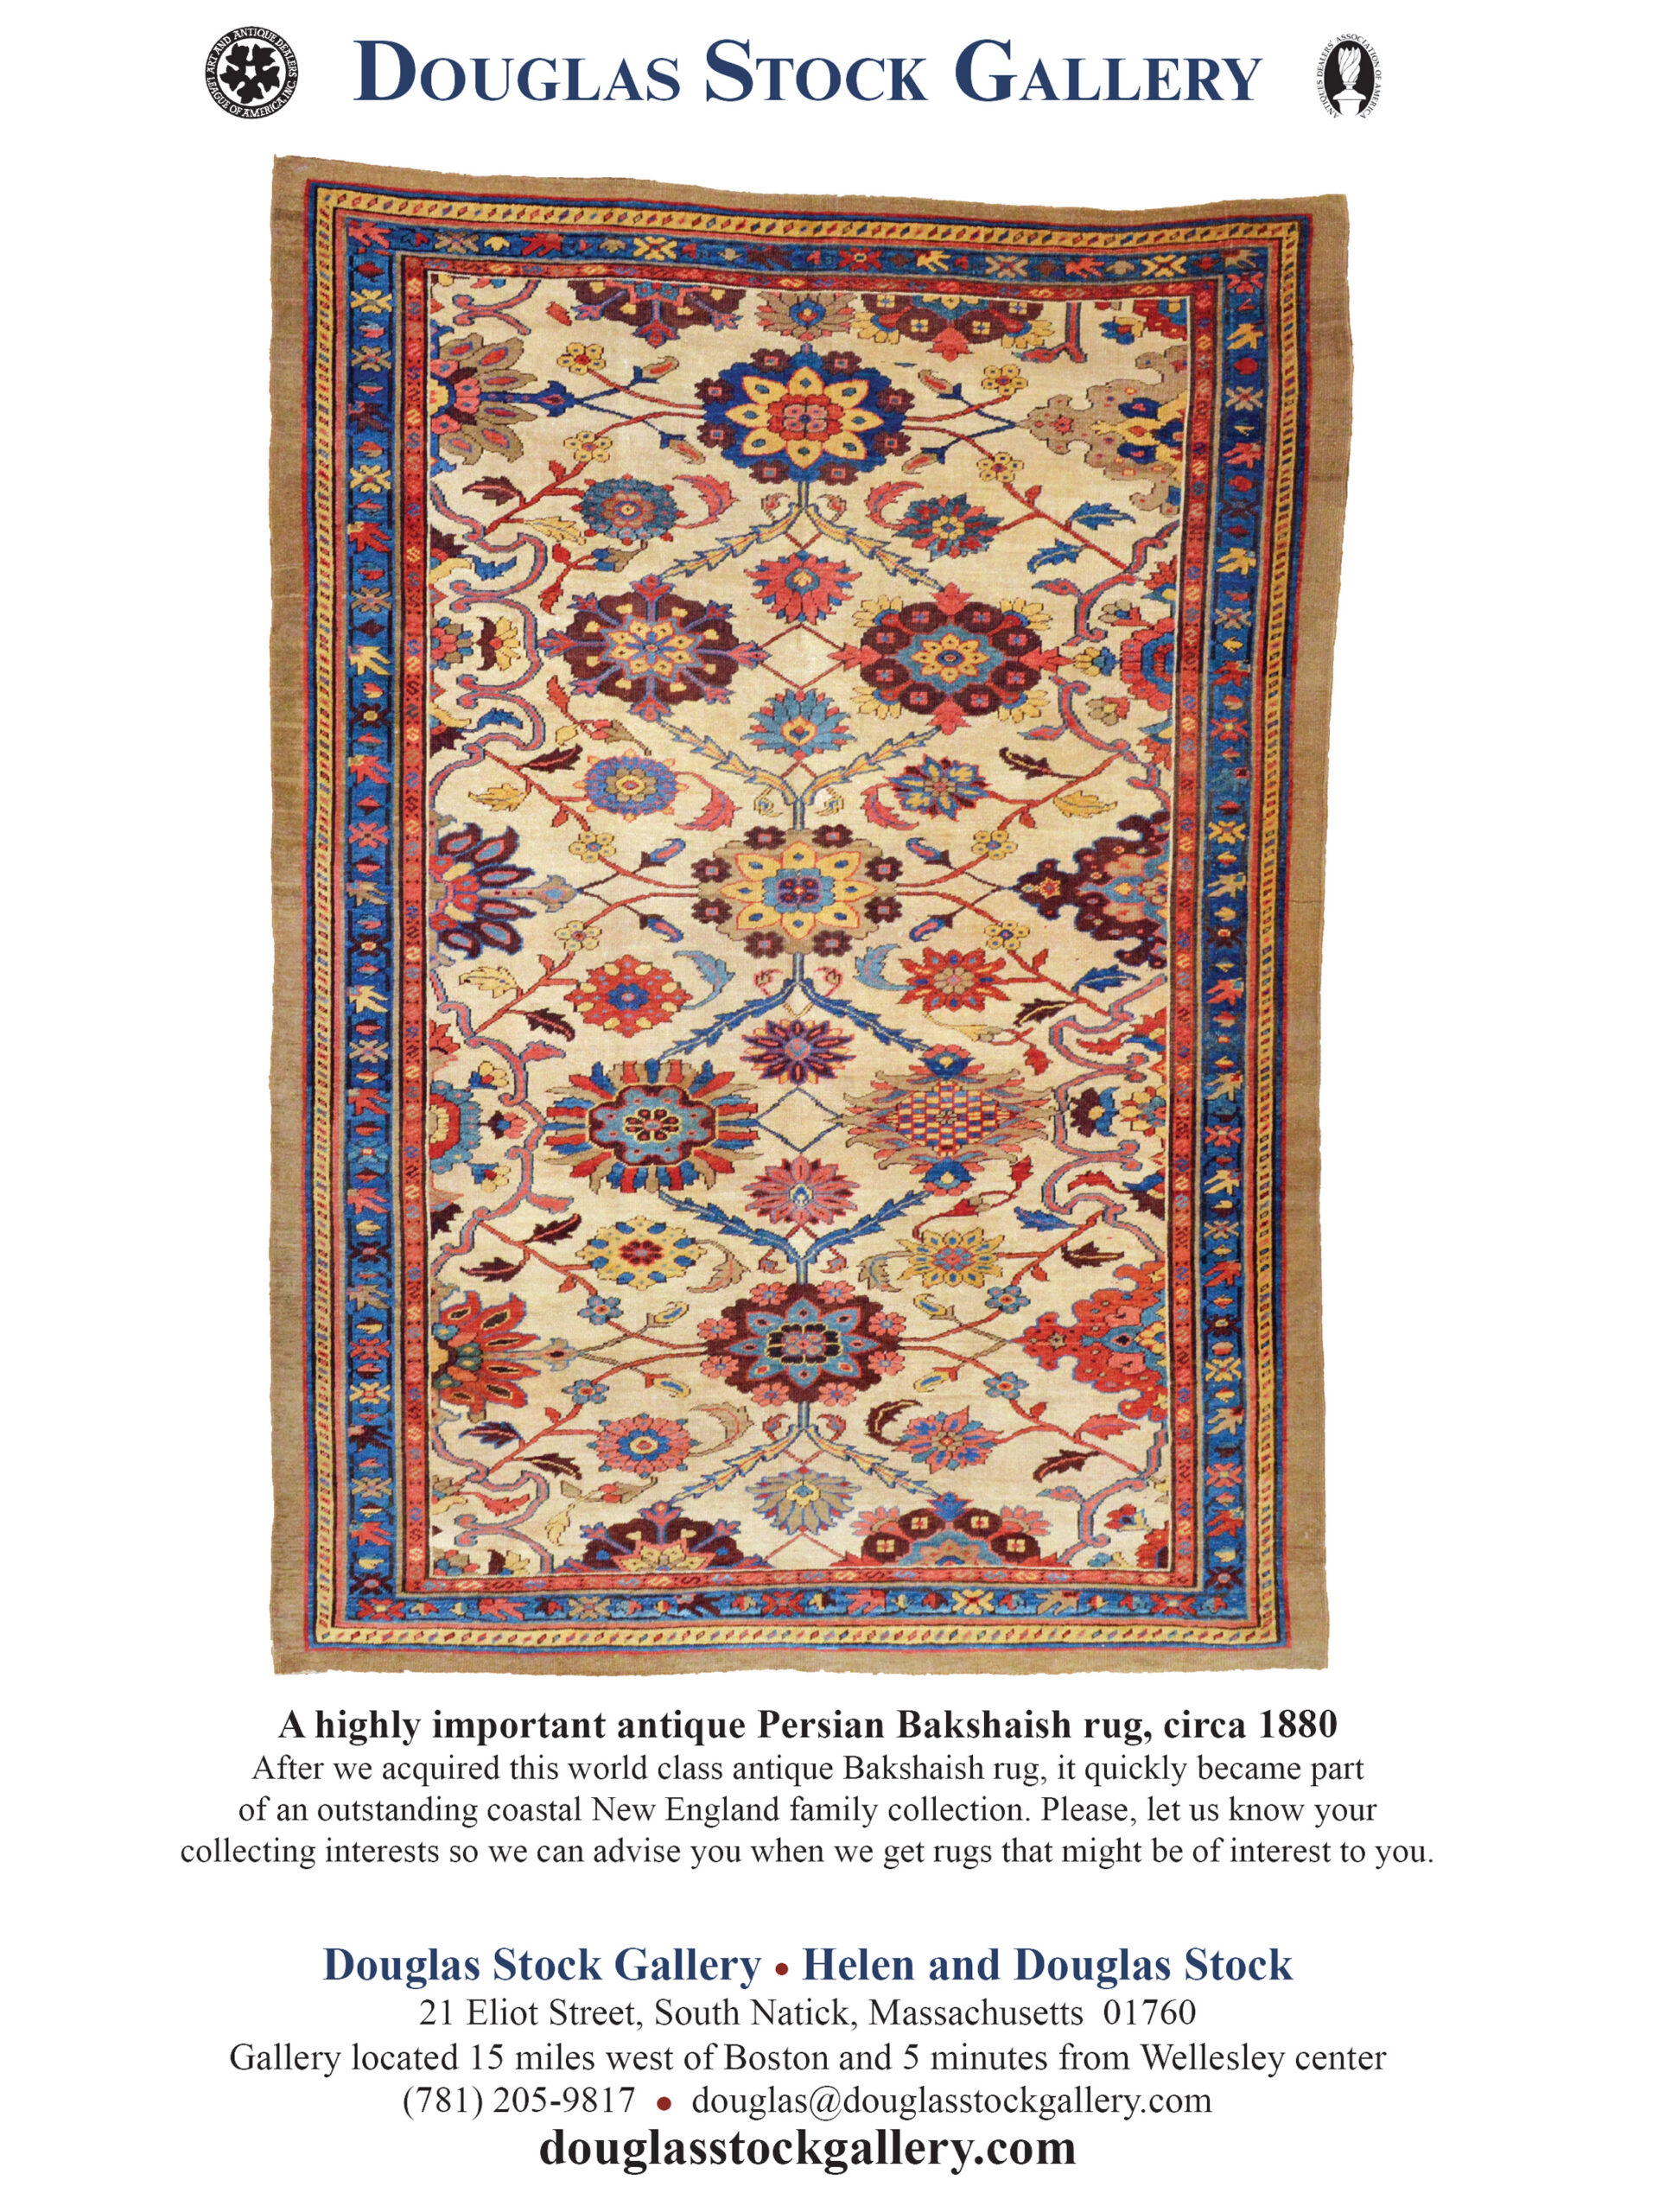 Douglas Stock Gallery is one of America's most selective dealers in antique Oriental rugs and Persian carpets. Our shop is based 15 miles west of Boston and 5 minutes from Wellesley center in historic South Natick, Massachusetts. Douglas Stock Gallery specializes in 19th and early 20th century Heriz "Serapi rugs, Bidjar rugs, Bakashiah rugs, Sultanabad rugs, Kurdish rugs, Caucasian rugs, Fereghan Sarouk rugs and Mohtasham Kashan rugs. Our shop is open by appointment Monday to Saturday. Douglas Stock Gallery works with individual clients, interior designers and architects in New England, New York, Washington DC, Florida and across the United States to California who are interested in high quality antique rugs. Helen and Douglas Stock are often in New York City on business and have many clients in the New York area, so please call or e-mail to schedule an appointment at our shop or your home.